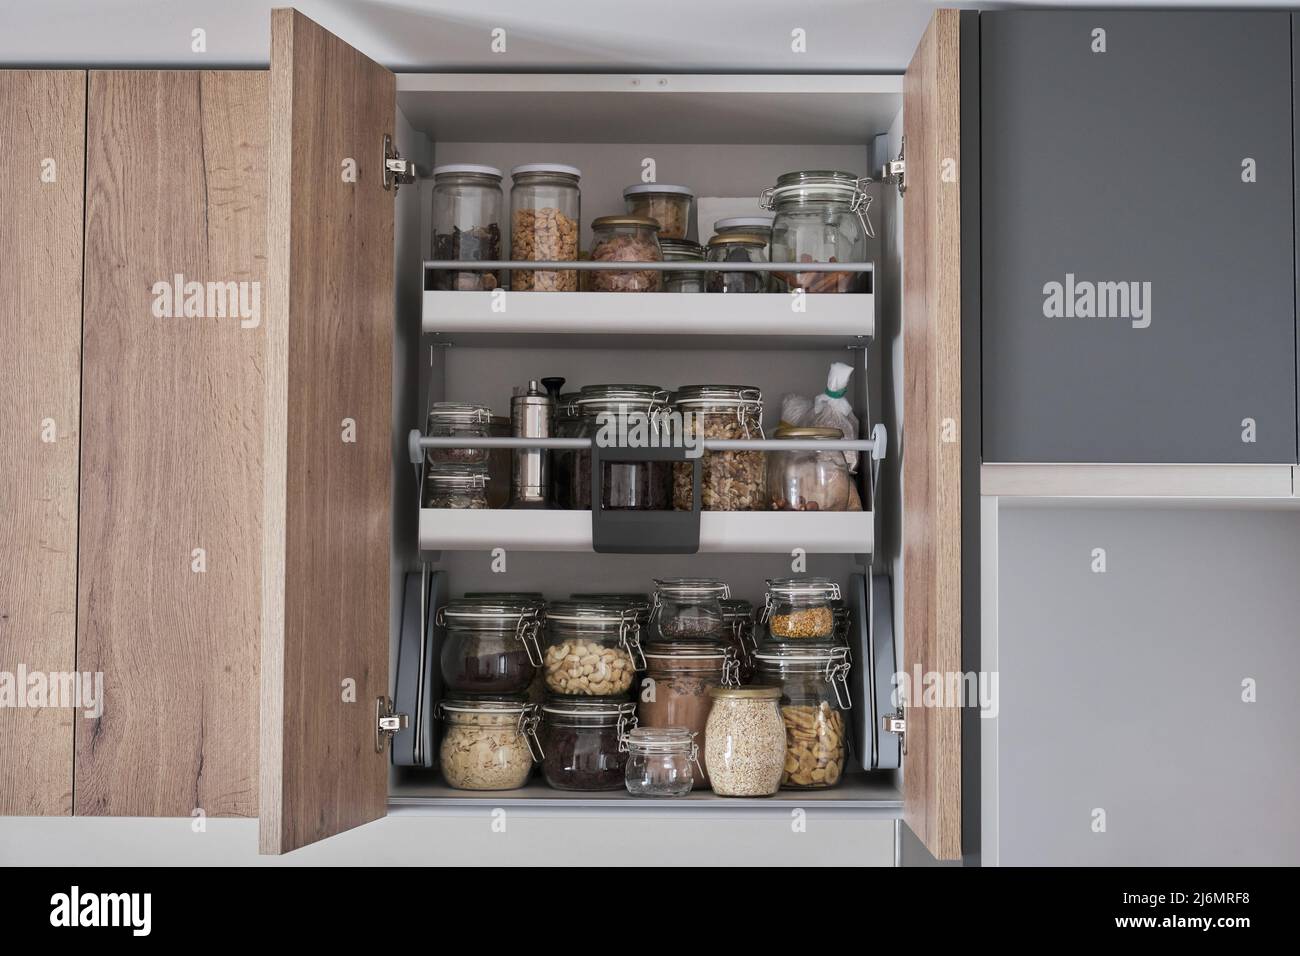 Variety of dry foods, grains, nuts, cereals in glass jars in kitchen cupboard. Stock Photo